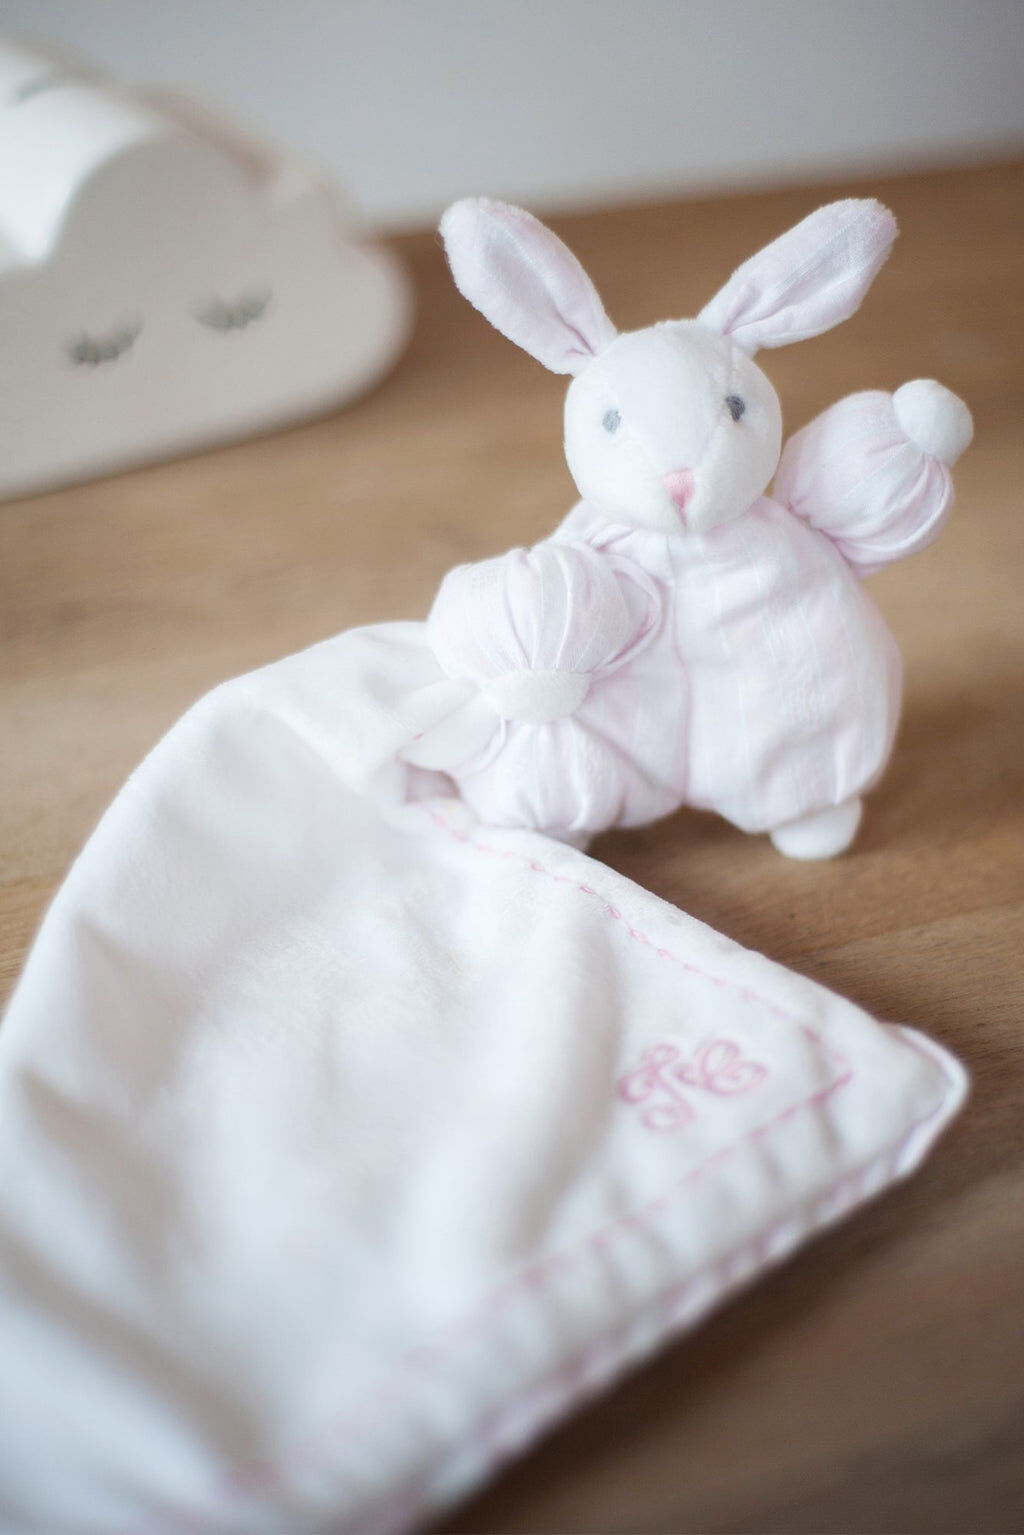 Augustin the rabbit 1977 - Comforter Pale pink